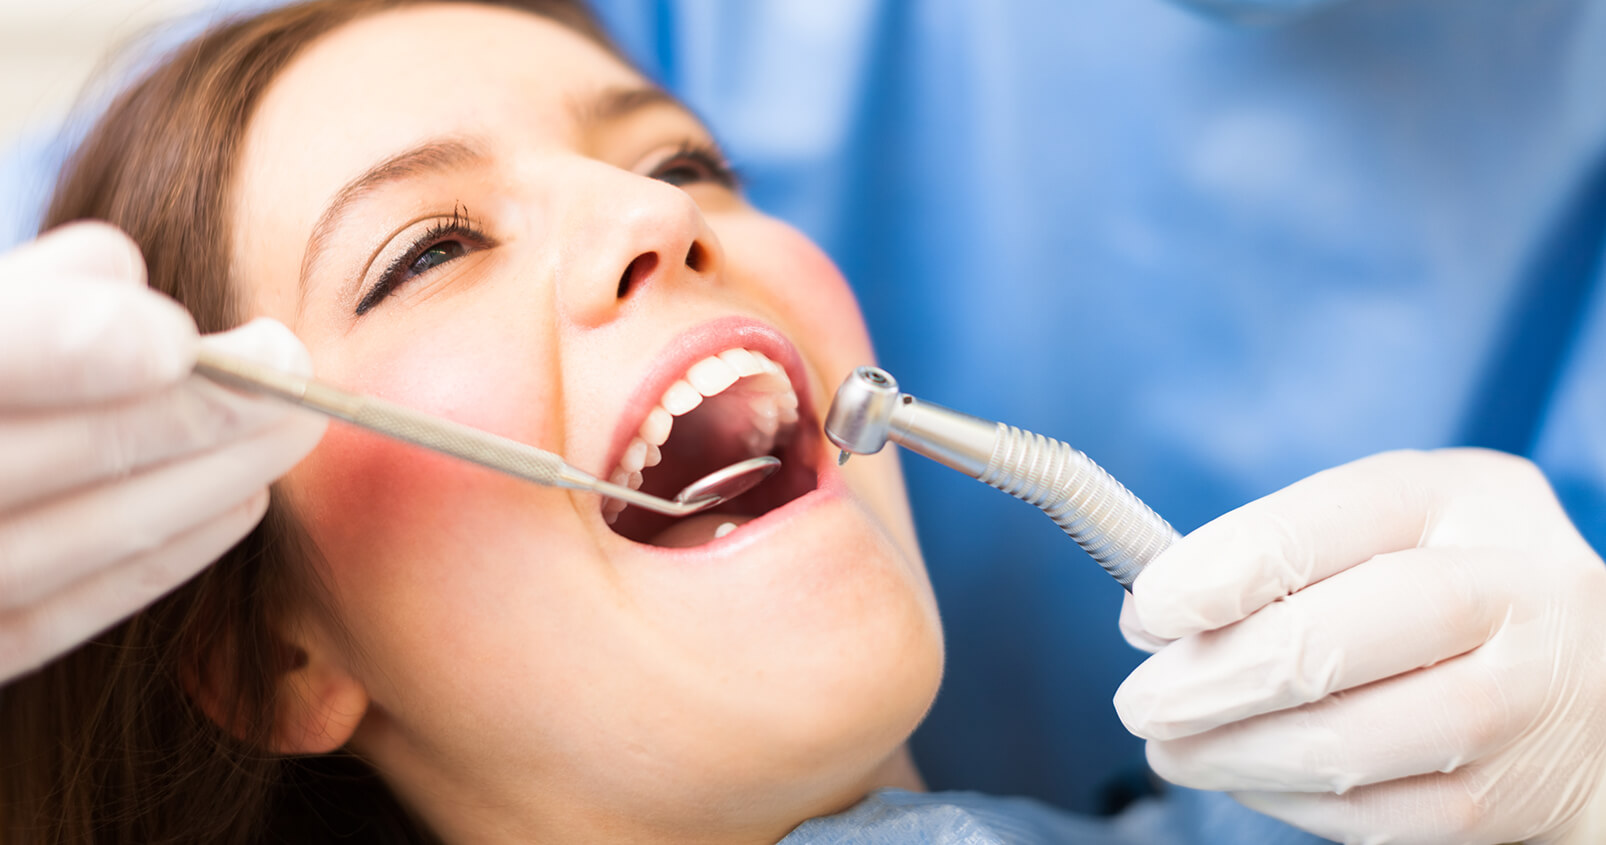 Porcelain dental crowns procedure: For the long, healthy life of your smile in Azusa, CA